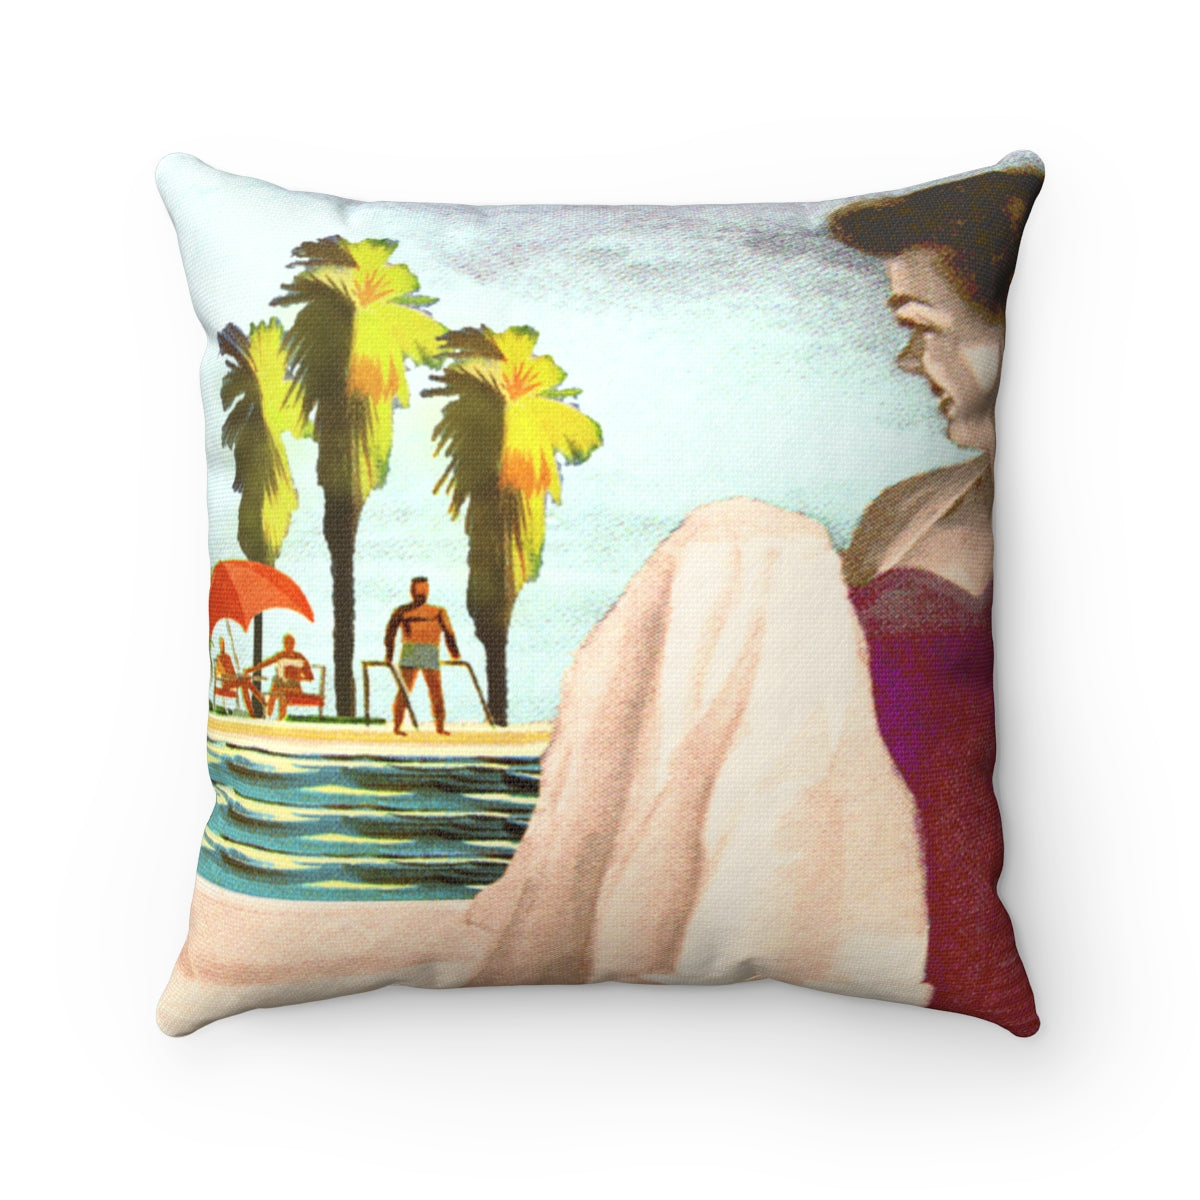 The Betty Square Pillow